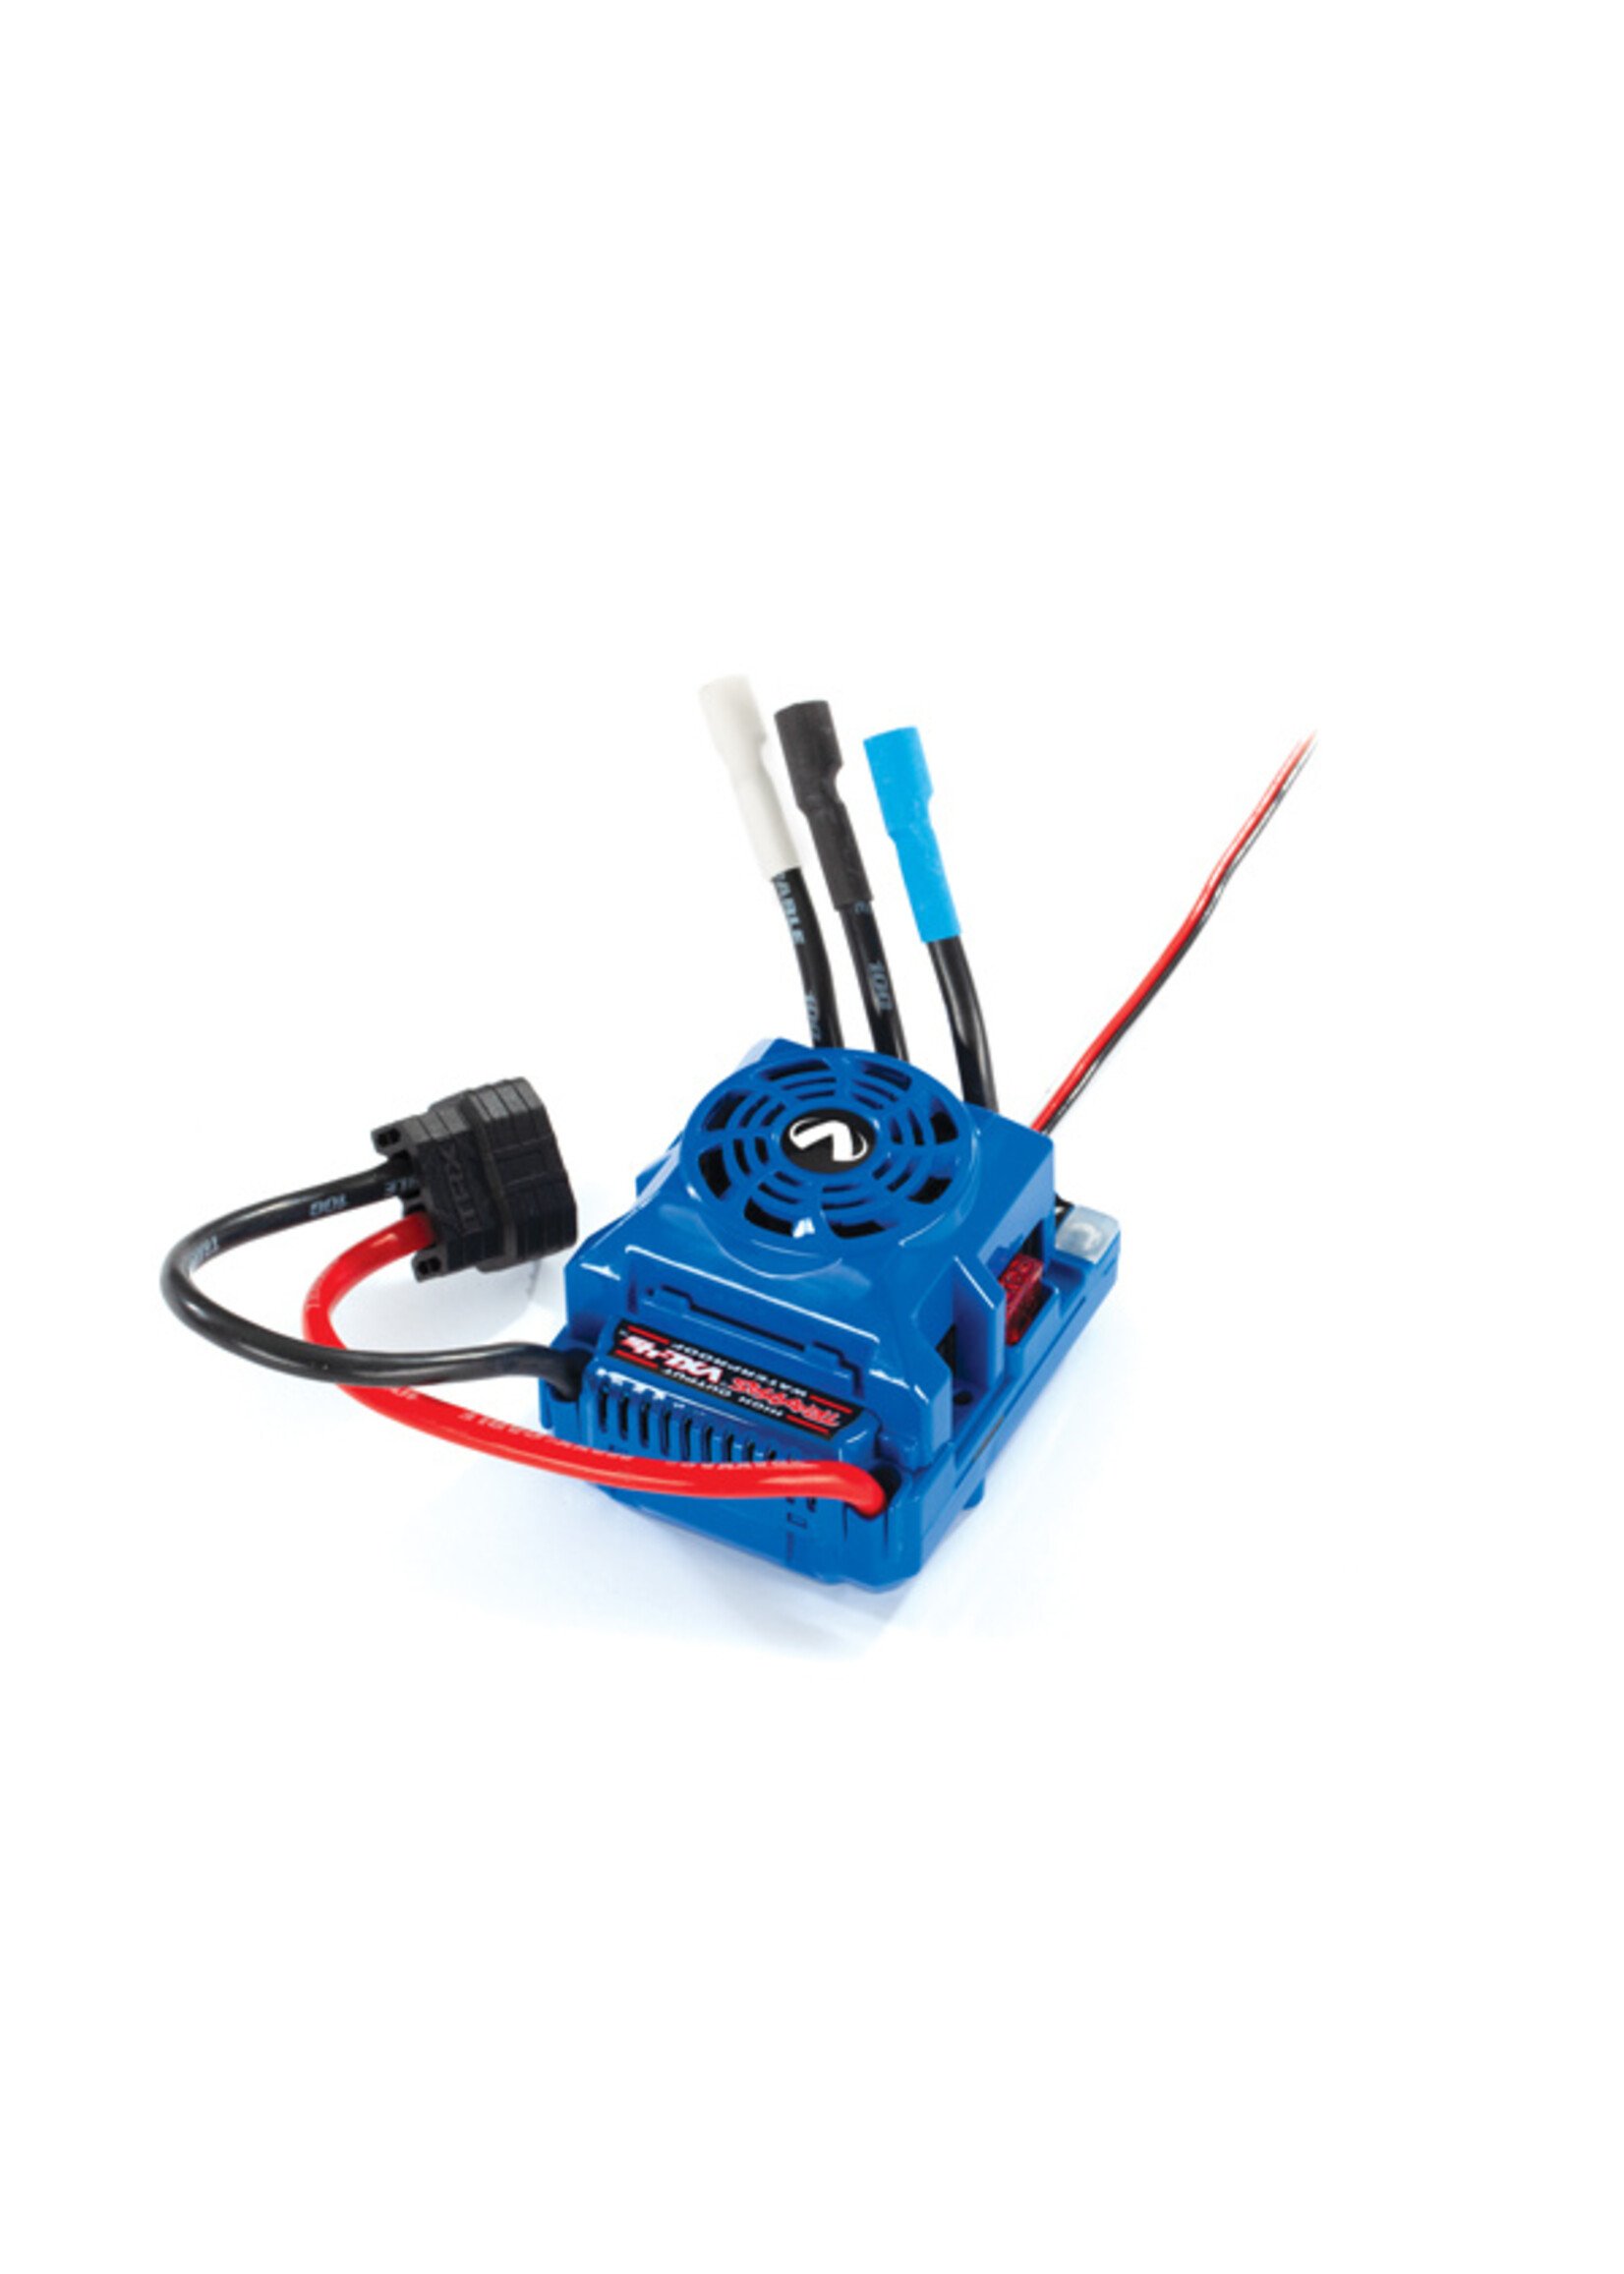 Traxxas 3465 - Velineon® VXL-4s High Output Electronic Speed Control